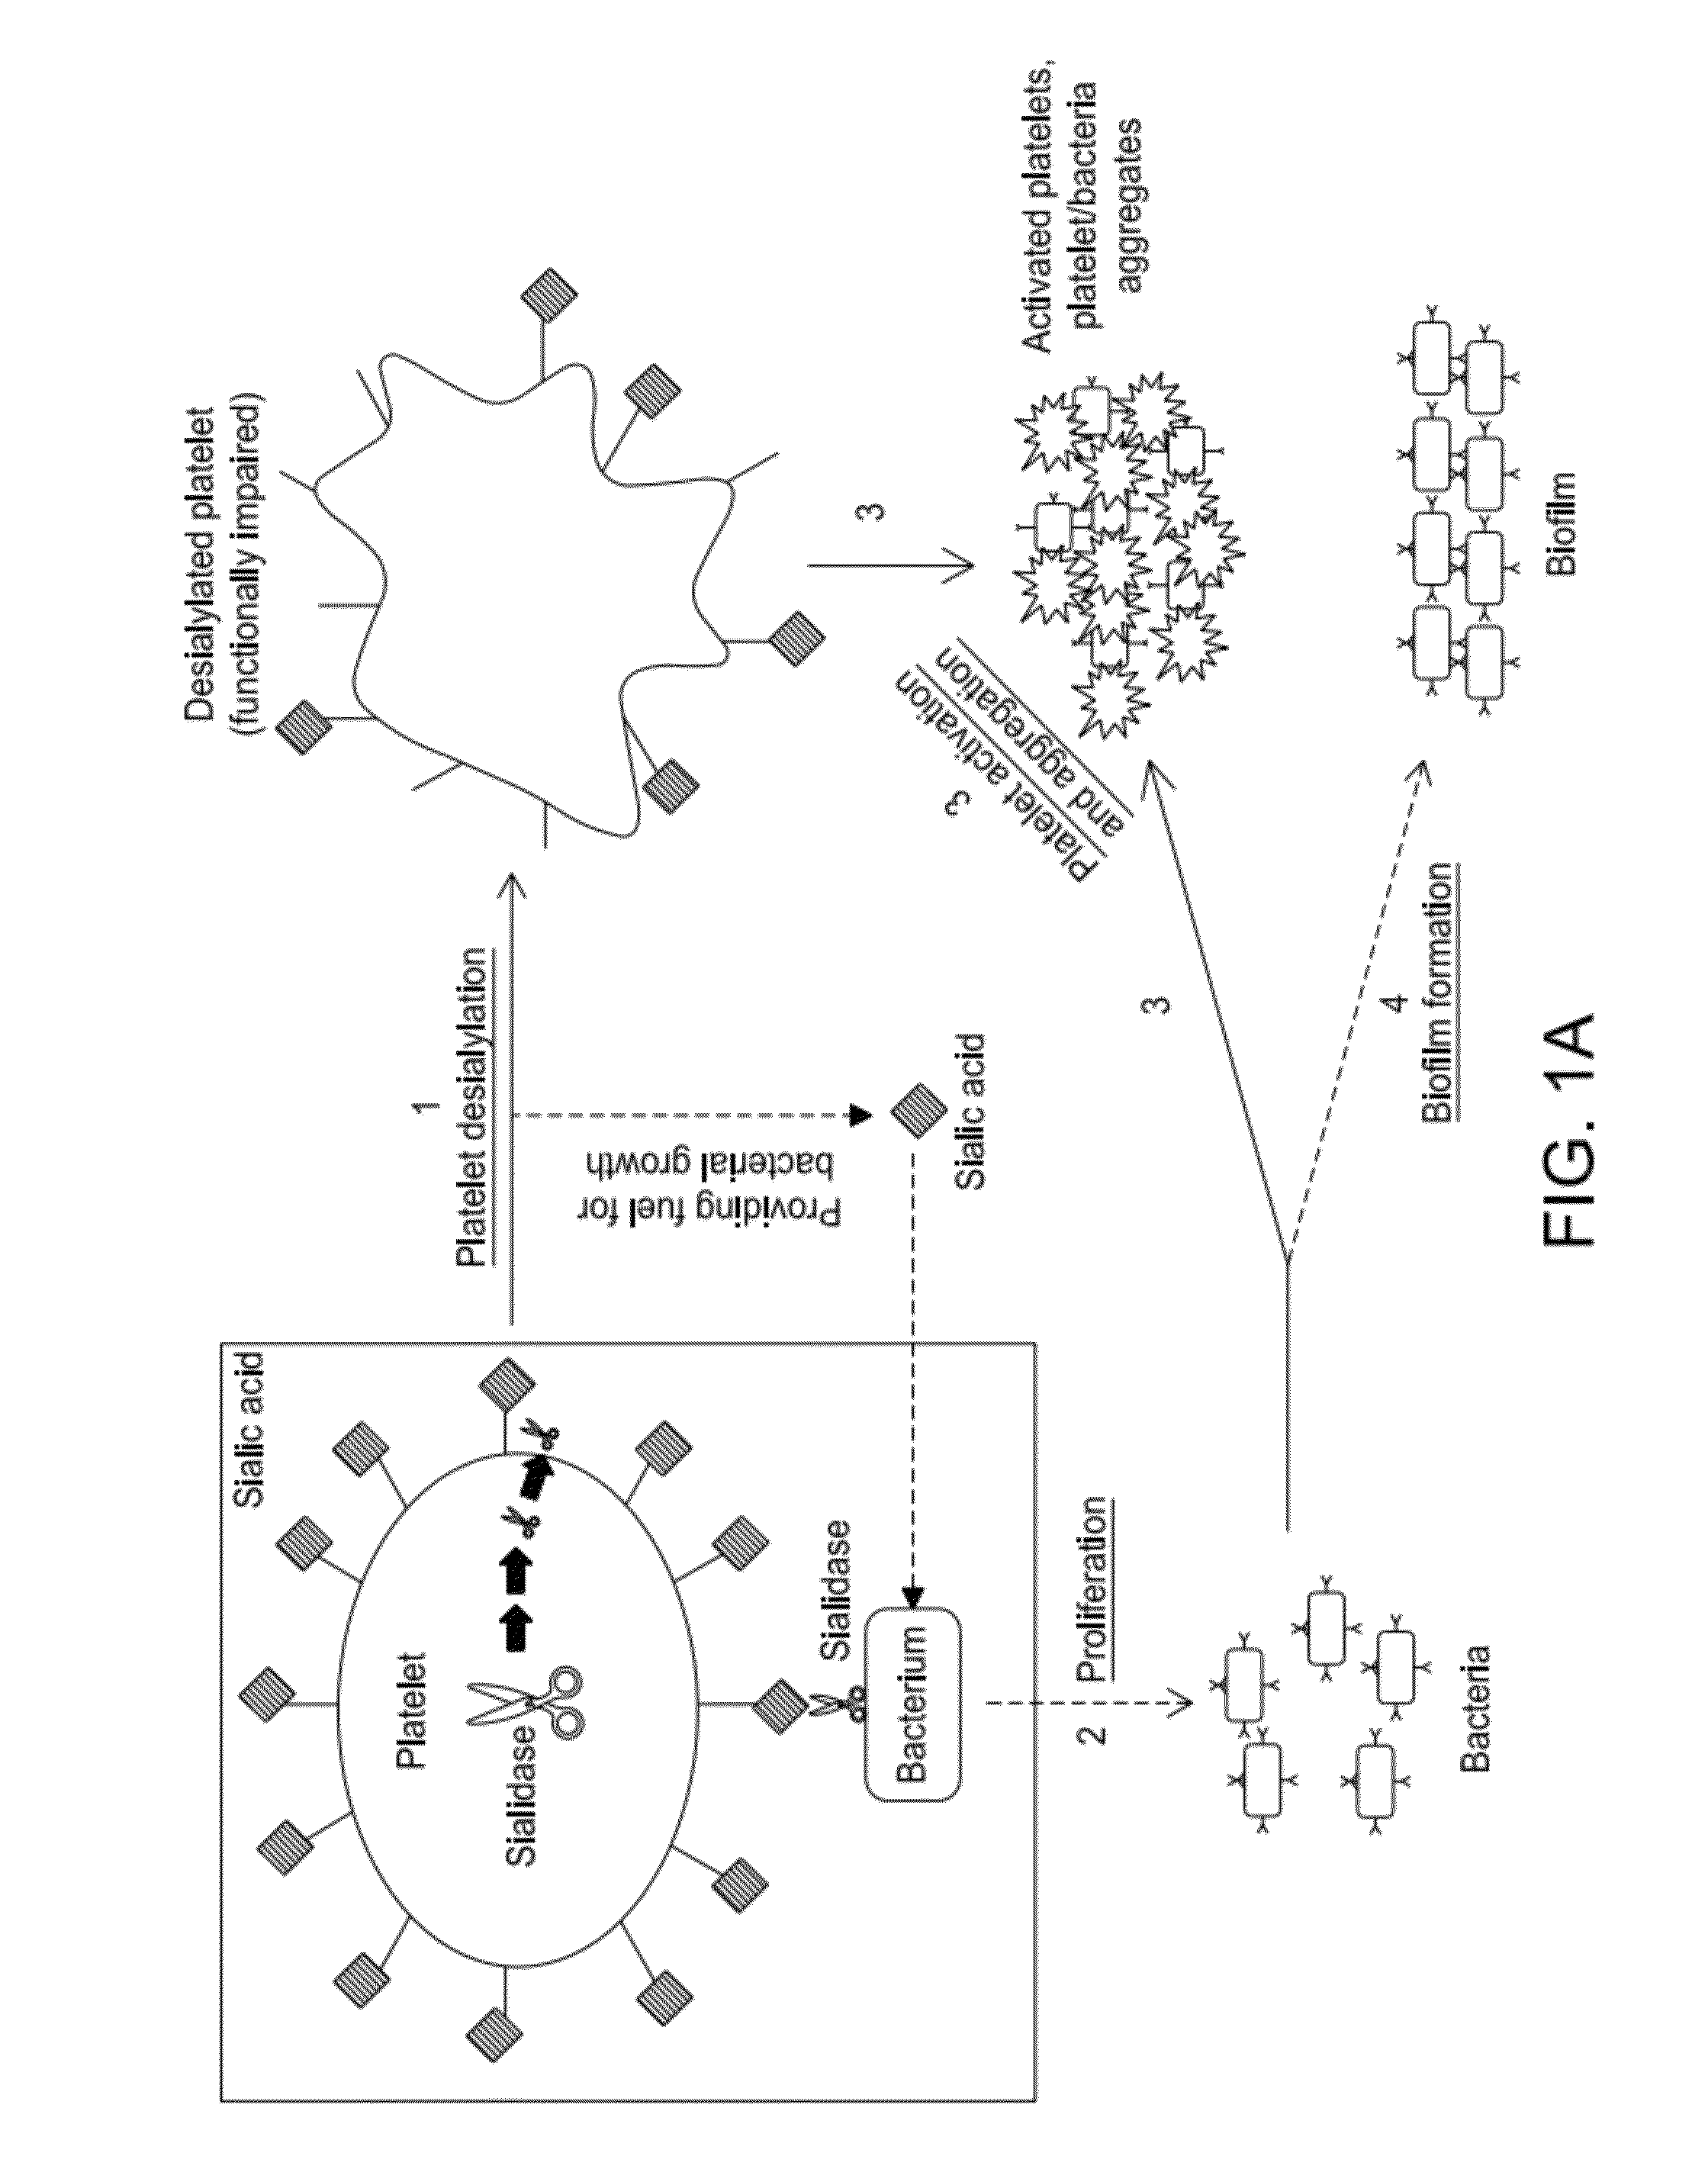 Platelet Storage and Reduced Bacterial Proliferation In Platelet Products Using A Sialidase Inhibitor